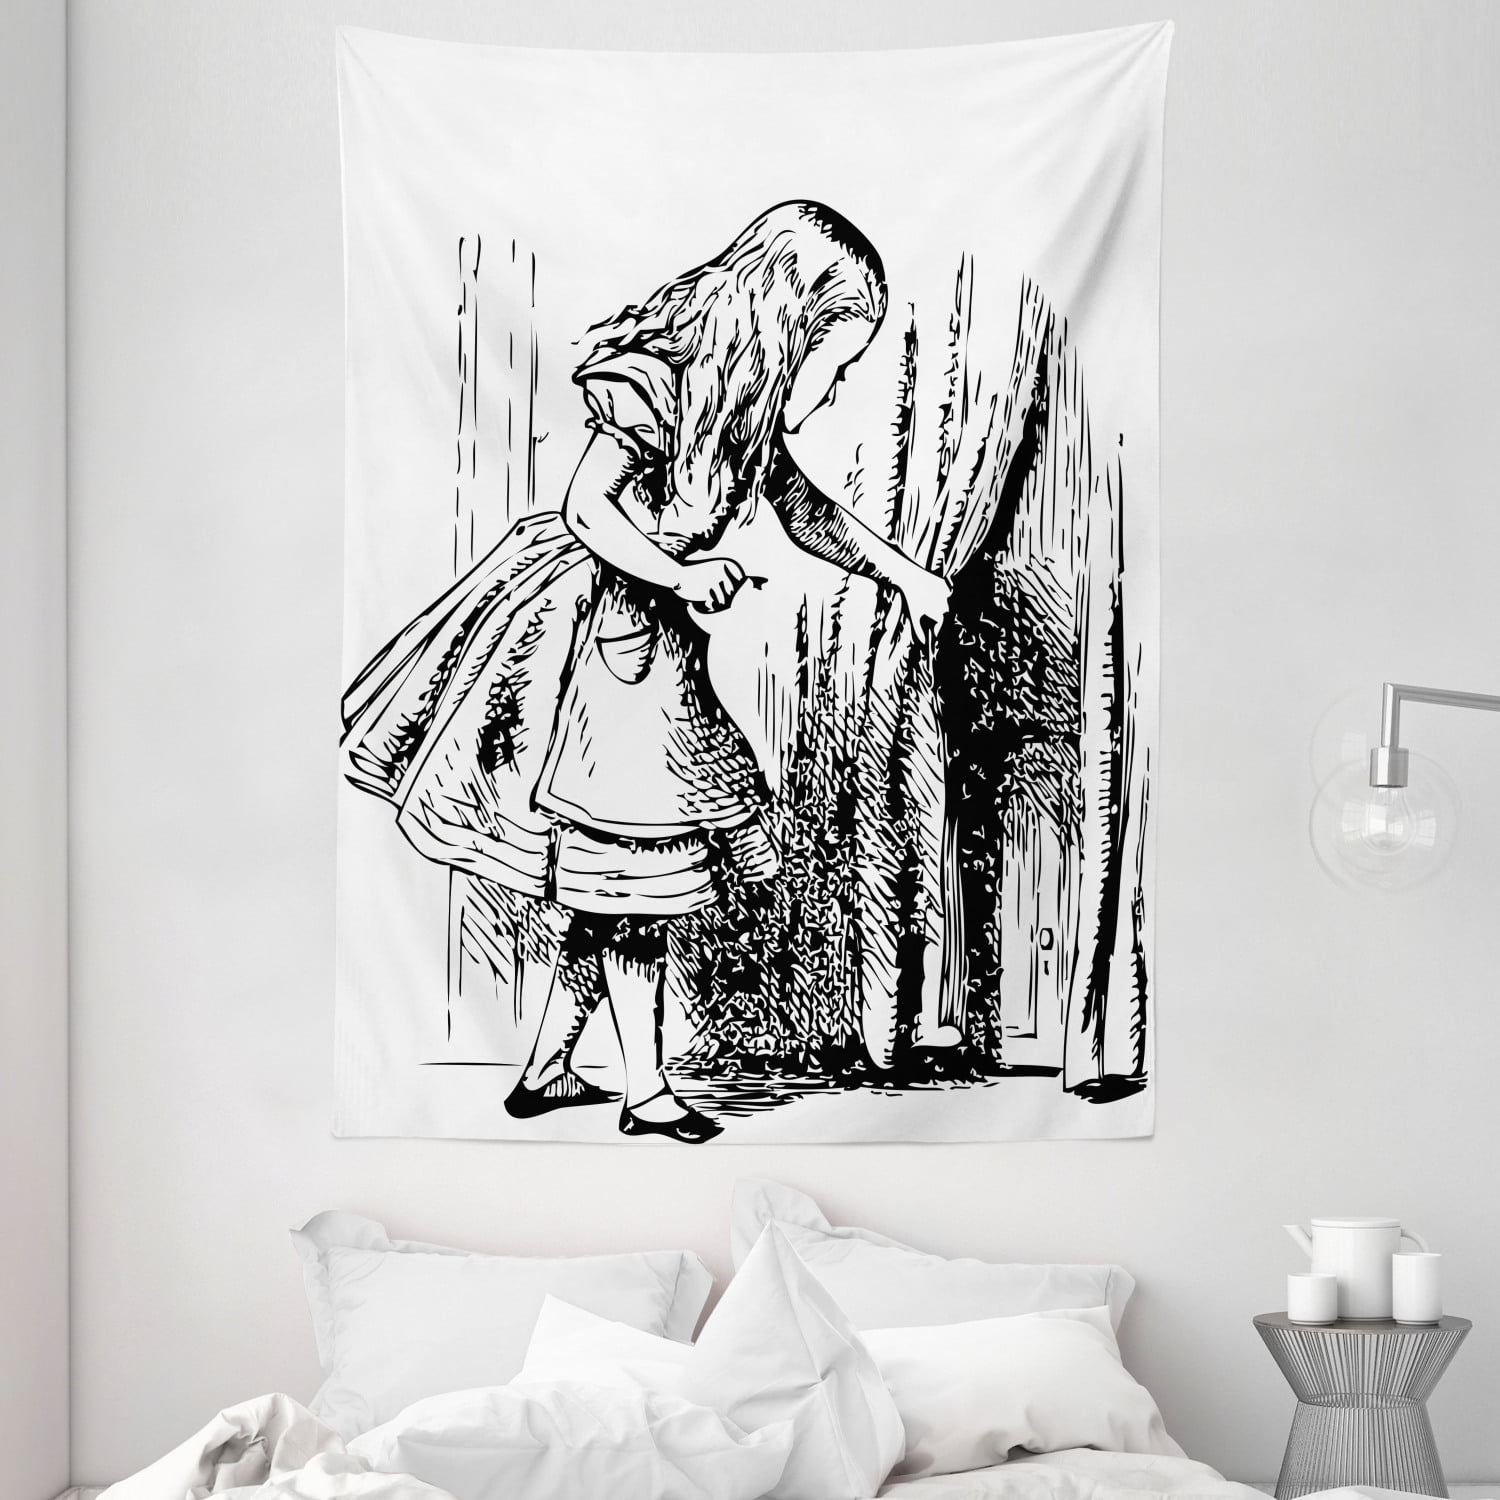 60 X 80 Black White Wall Hanging for Bedroom Living Room Dorm Decor Black and White Alice Looking Through Curtains Hidden Door Adventure Ambesonne Alice in Wonderland Tapestry